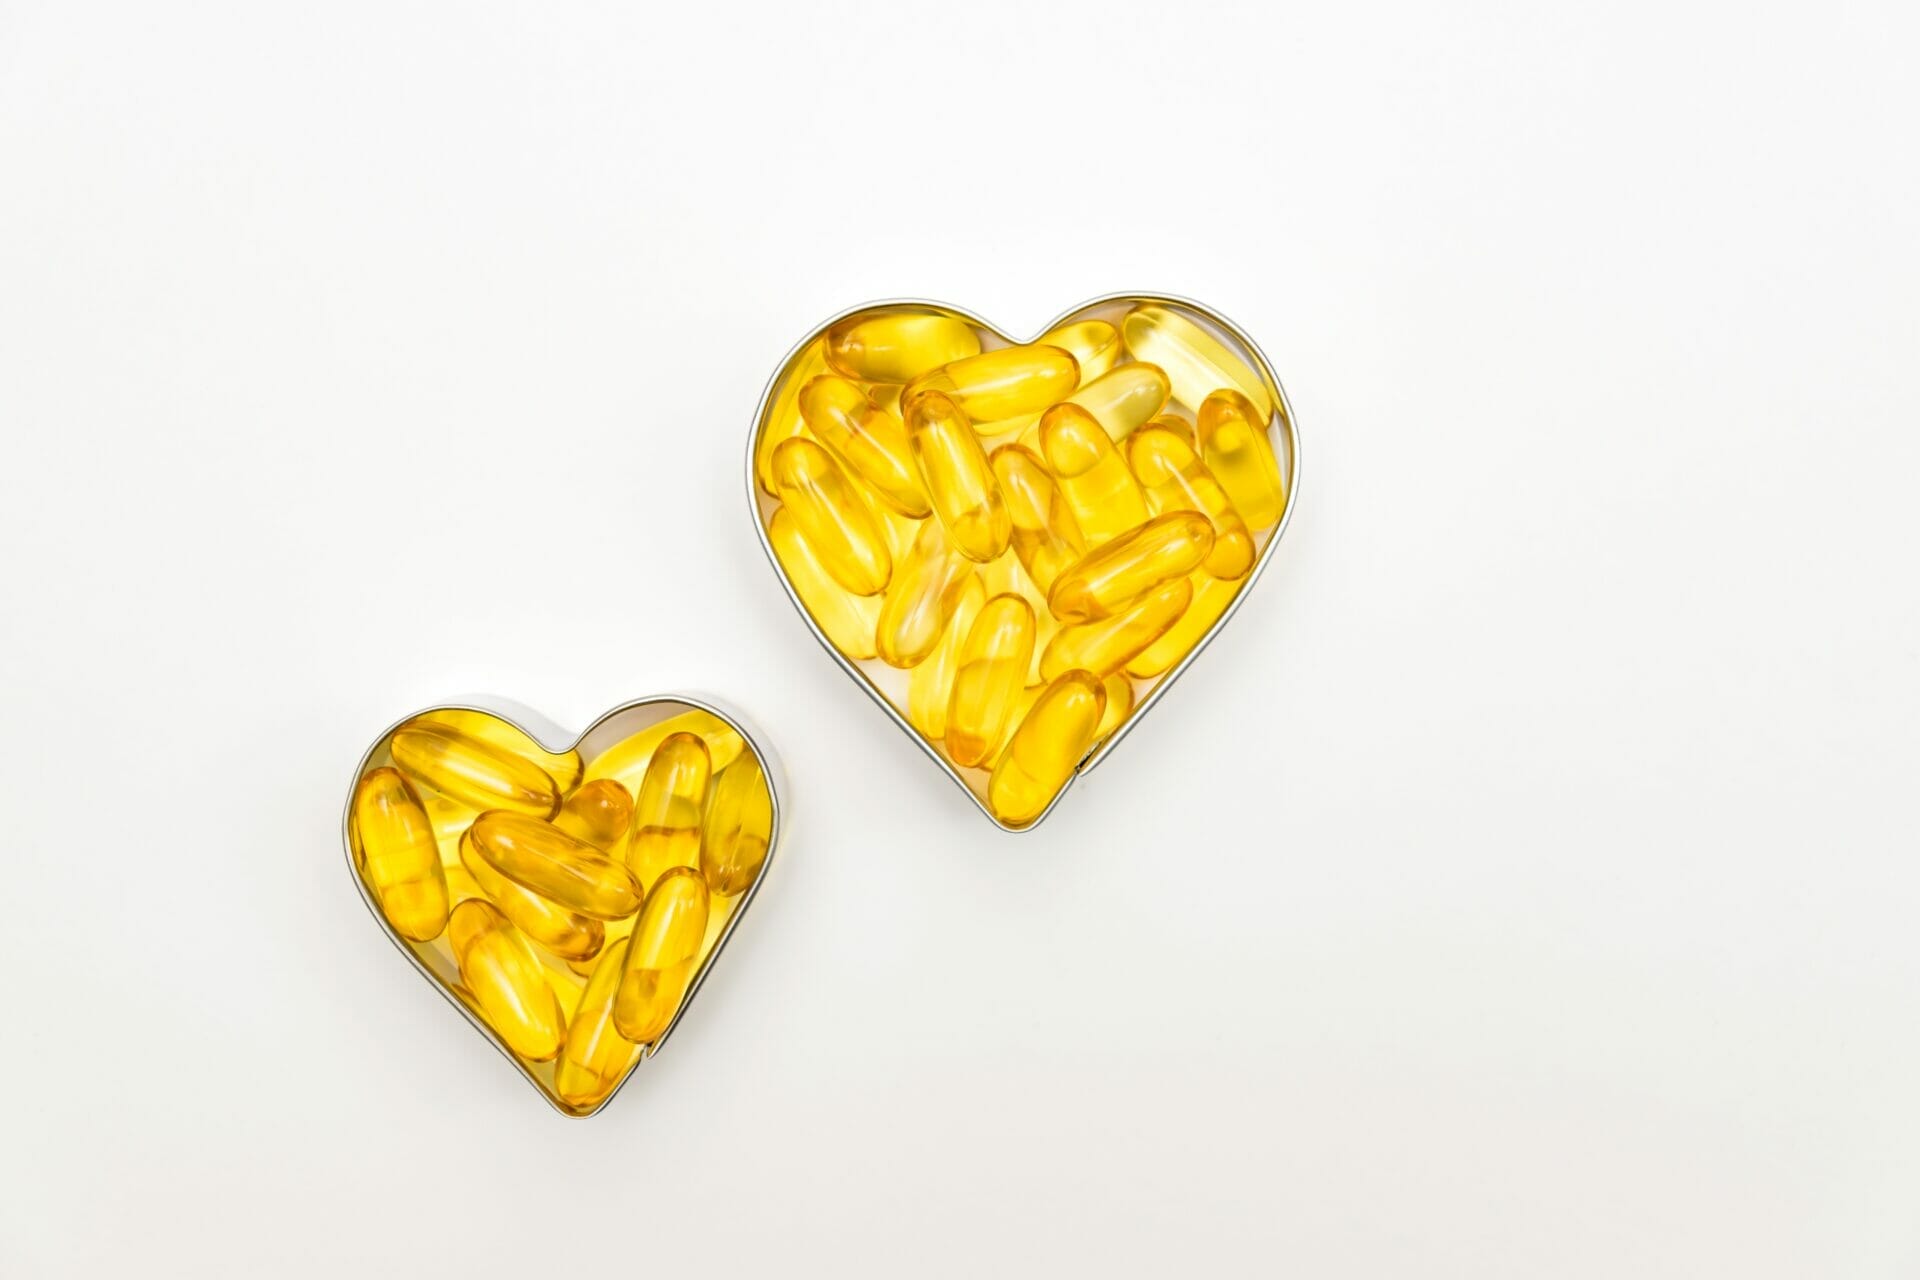 Nutrients from NORMAL meals vs multivitamin supplements, which is better?